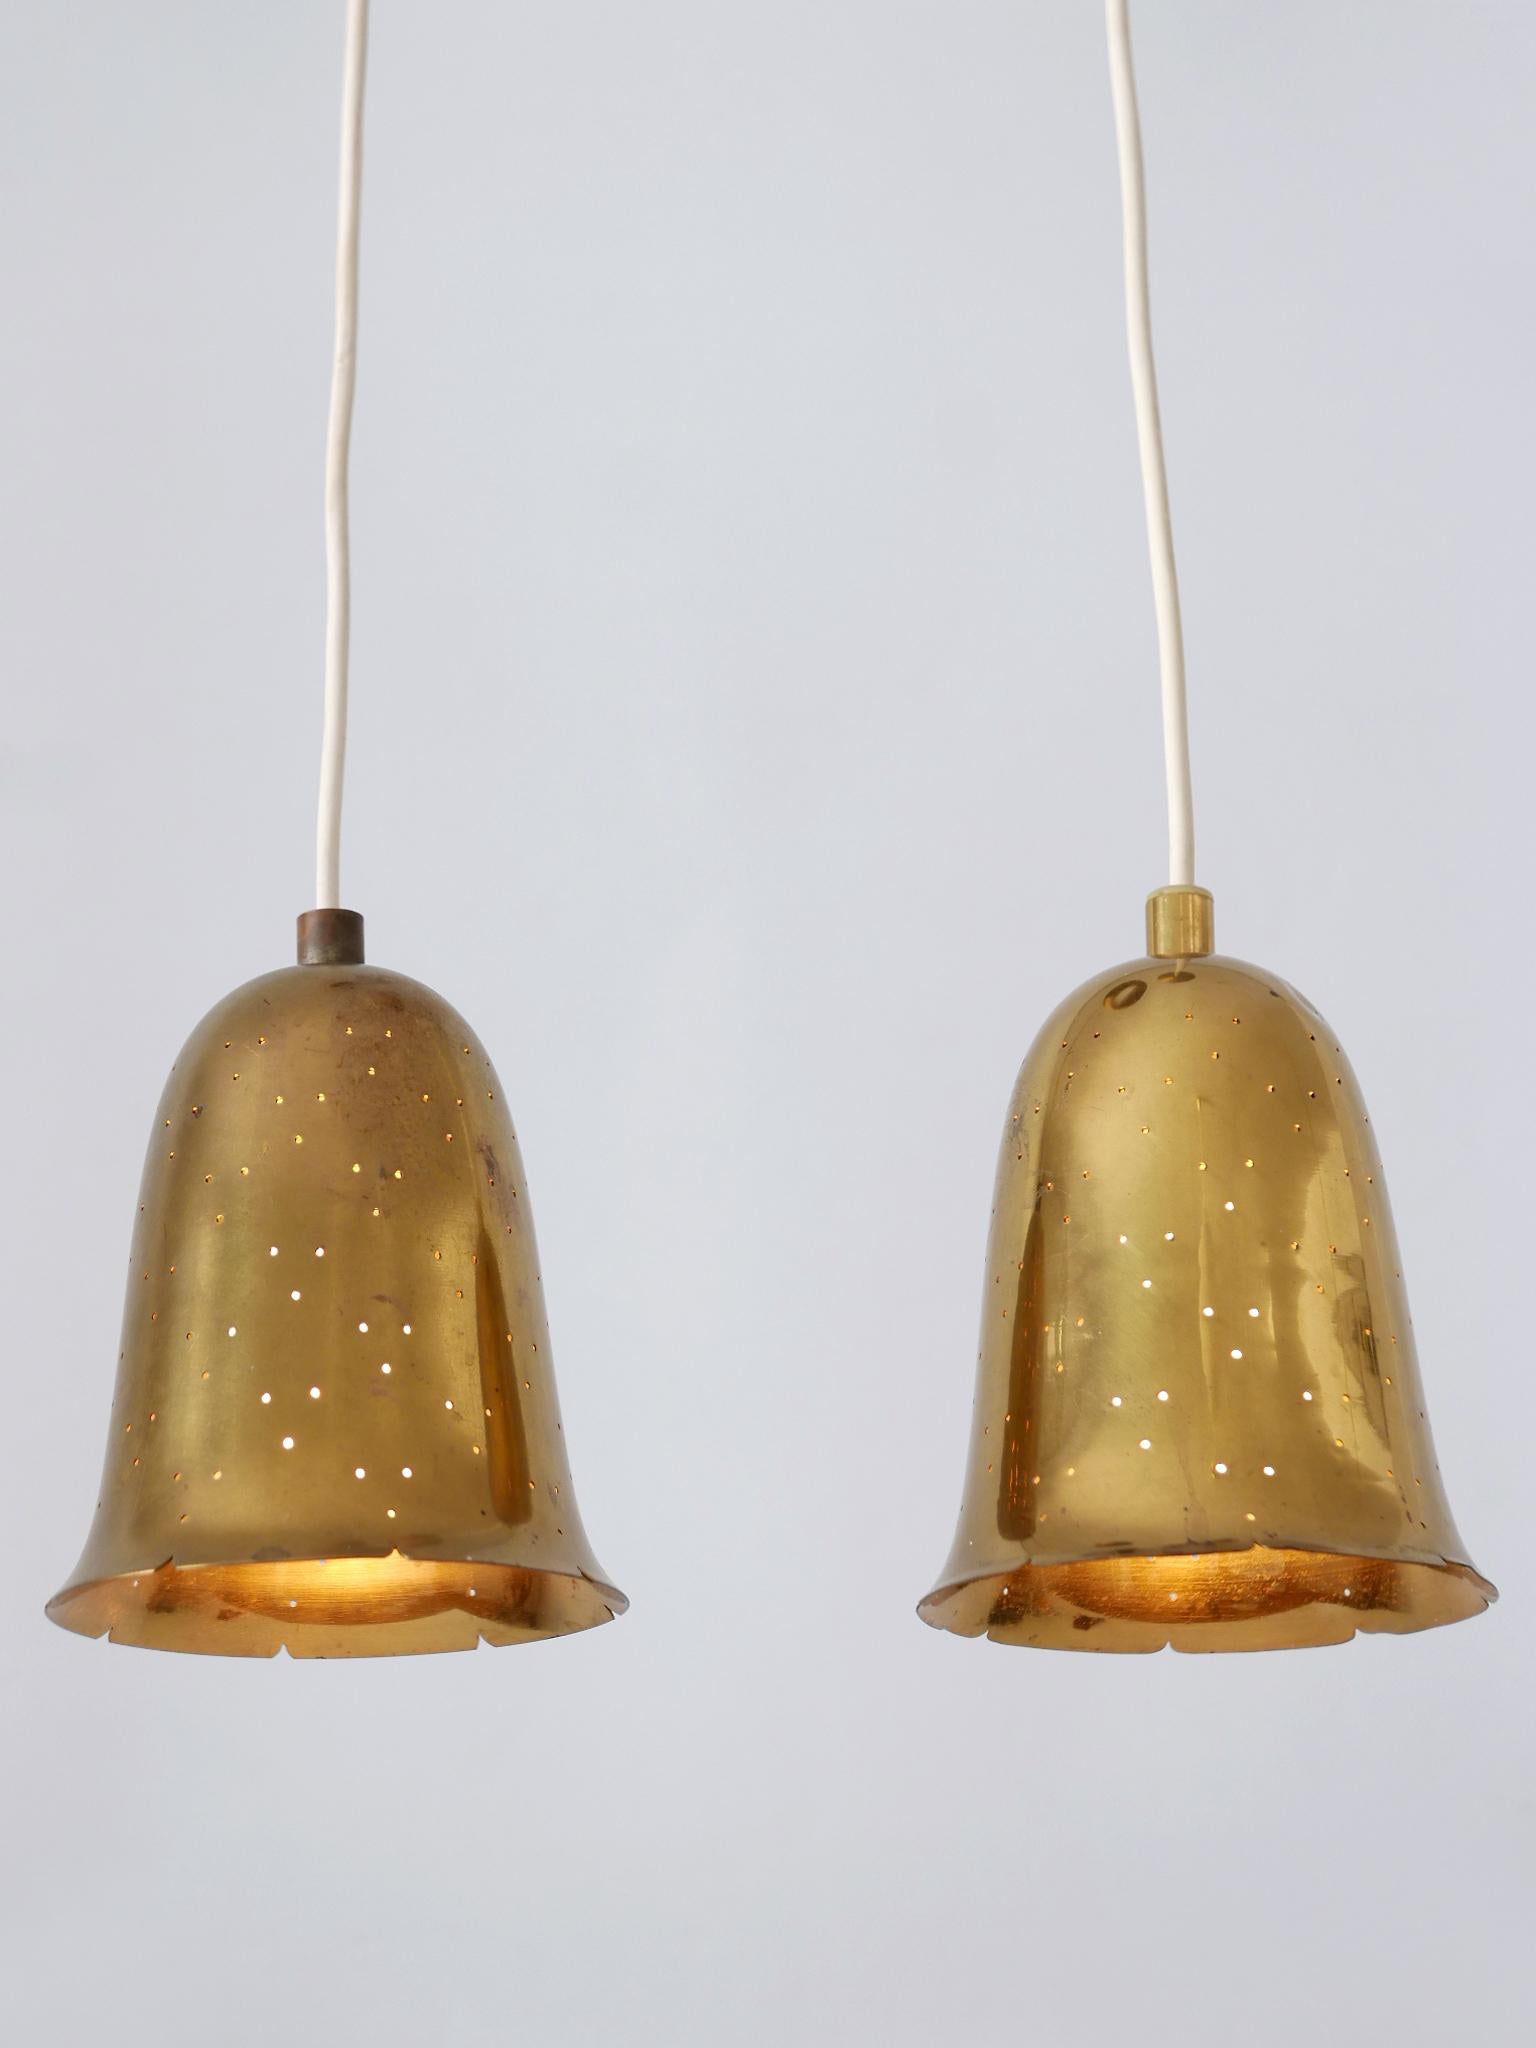 Set of two lovely and highly decorative Mid-Century Modern perforated brass pendant lamps. Manufactured by Boréns Borås, Sweden 1950s.

Executed in perforated brass, the pendant lamps are executed with 1 x E127 / E26 Edison screw fit bulb sockets,